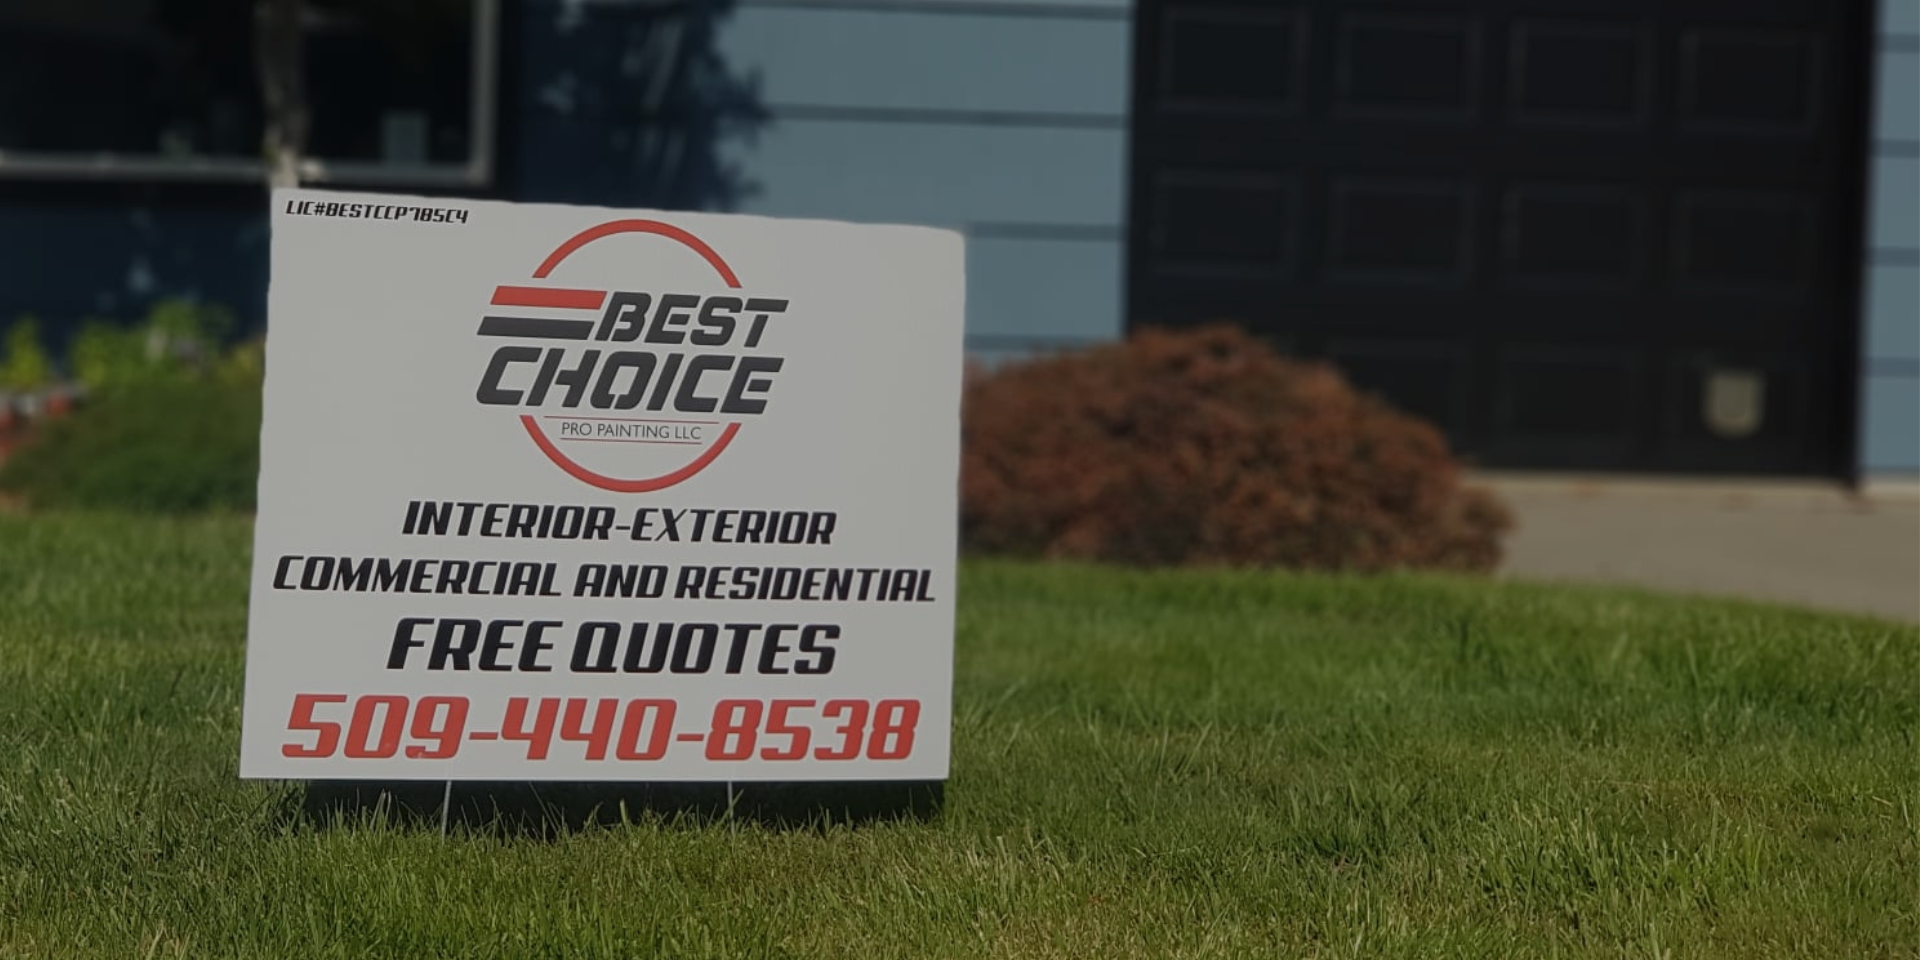 Photo of an advertisement poster in the font of a client's lawn for Best Choice Pro Painting